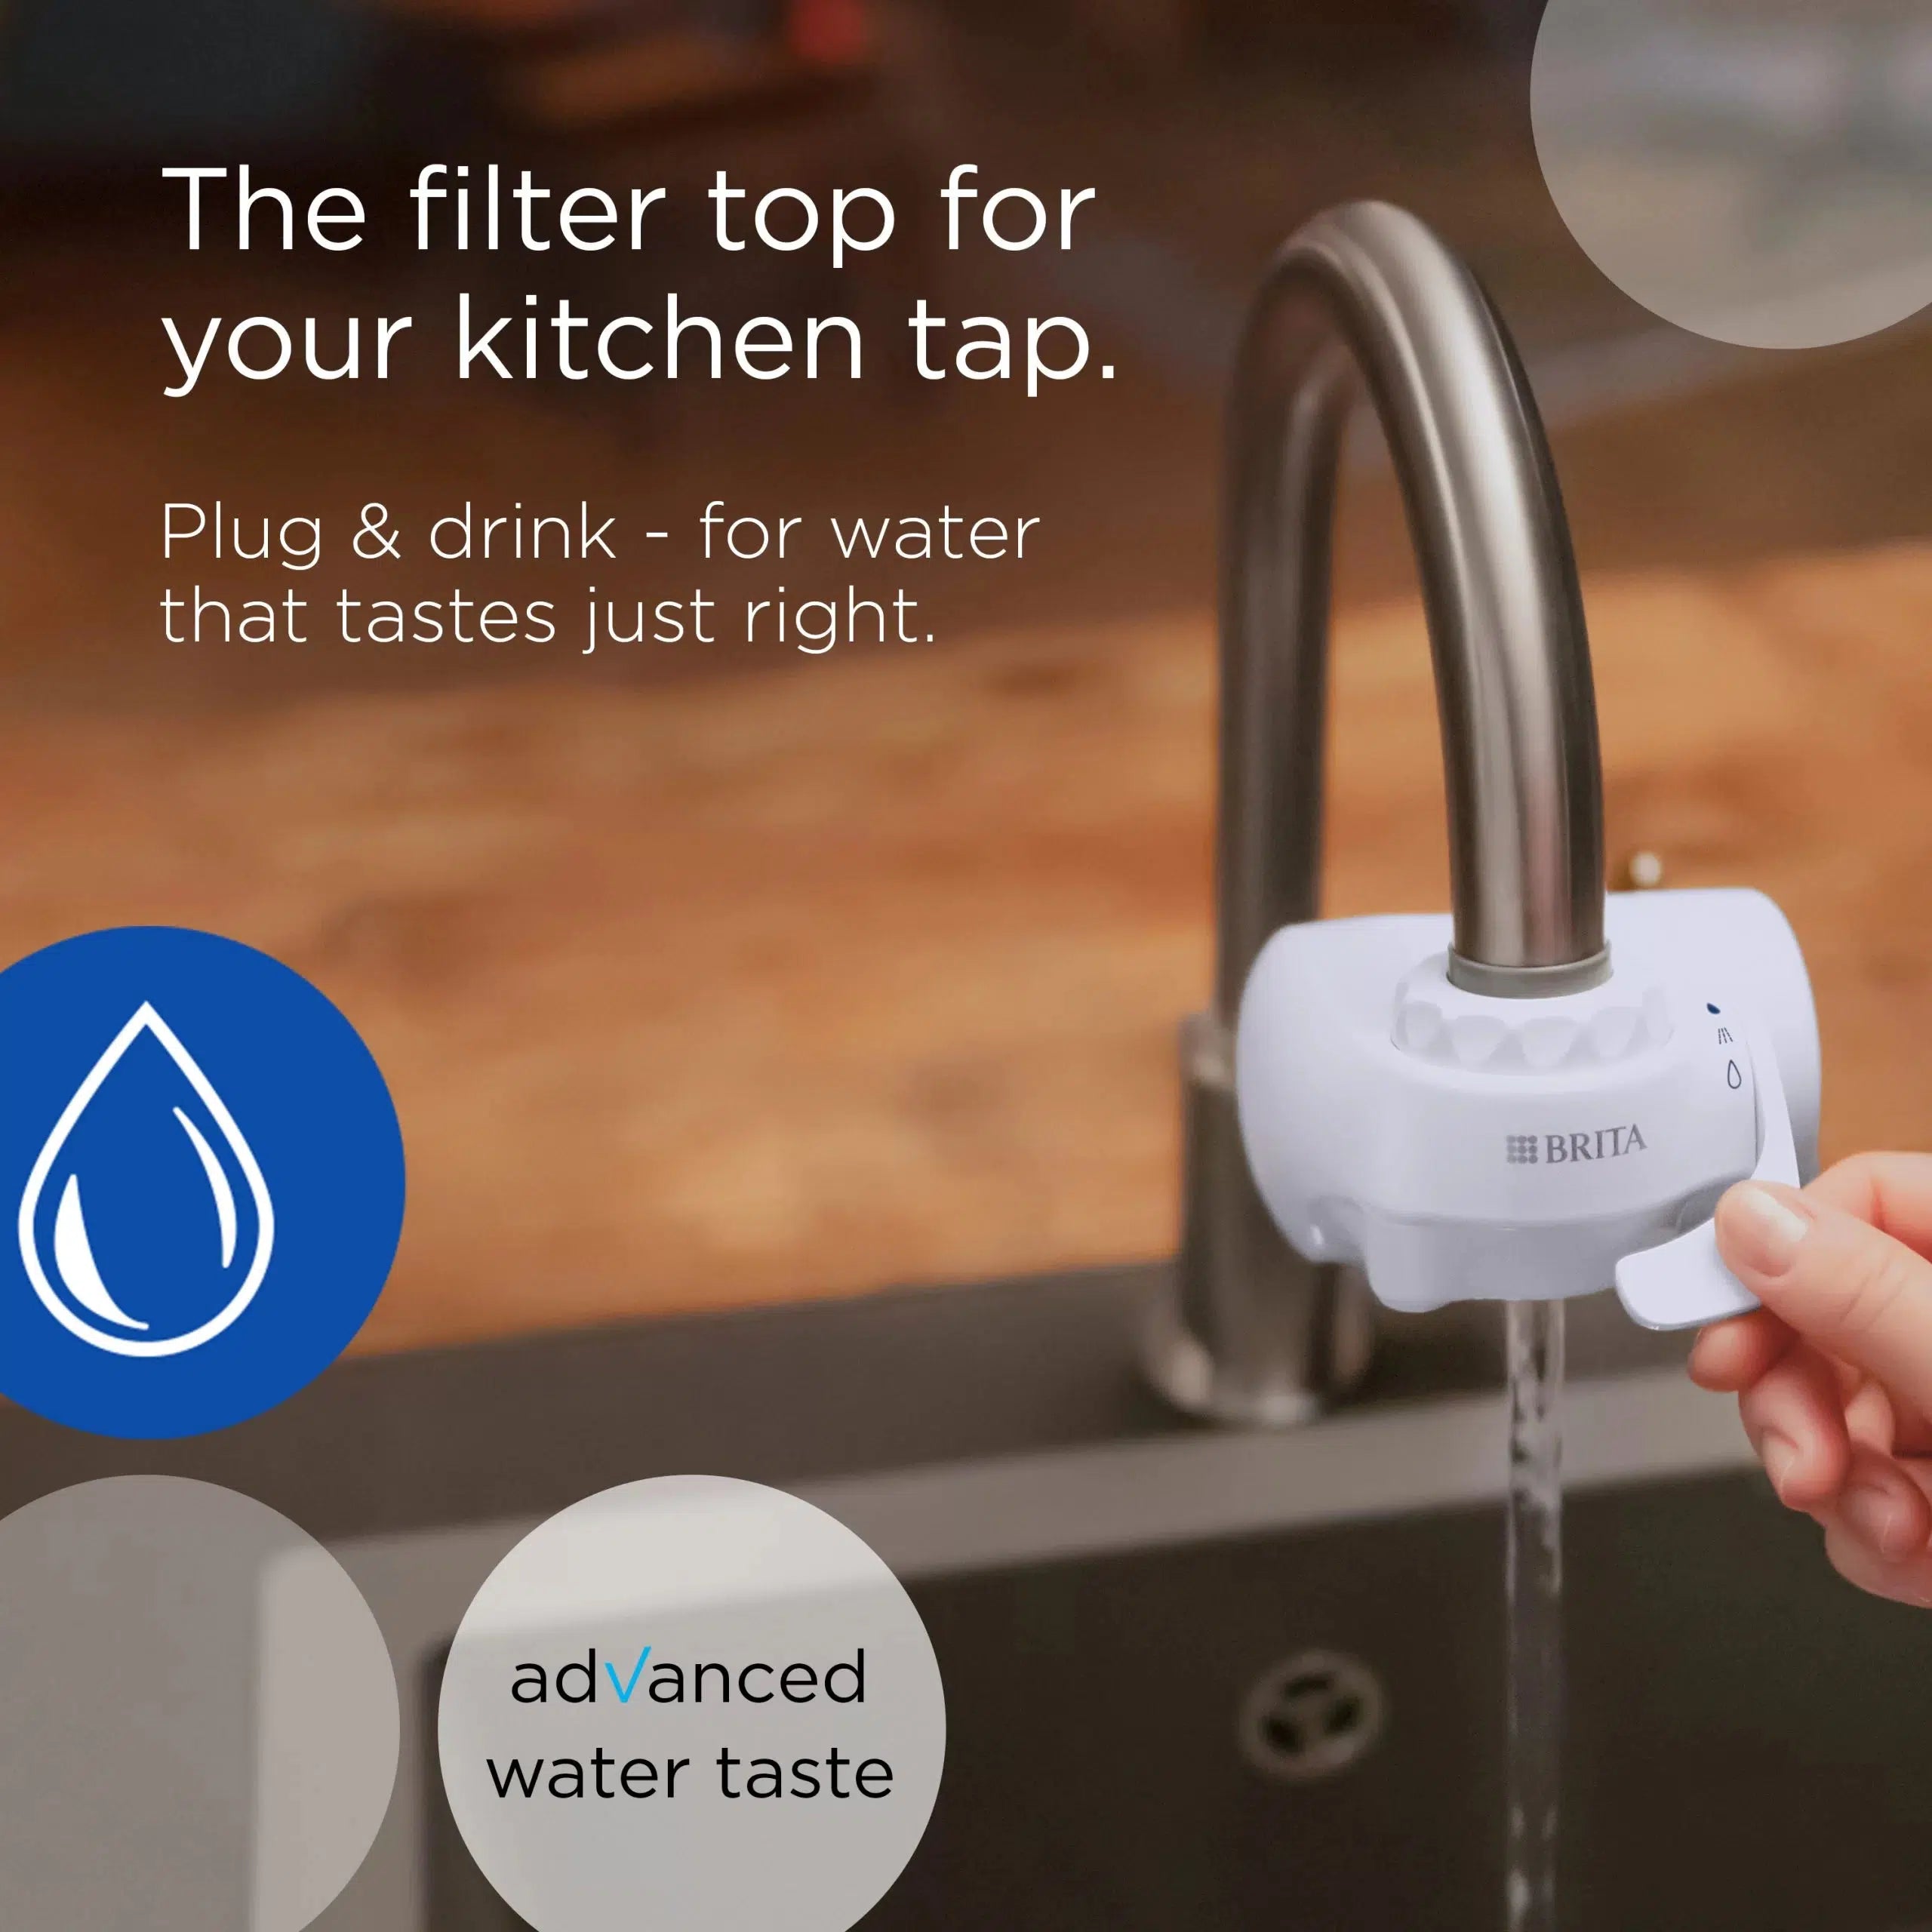 Brita On Tap V Water Filtration System - delivers better-tasting water with a simple one-click installation